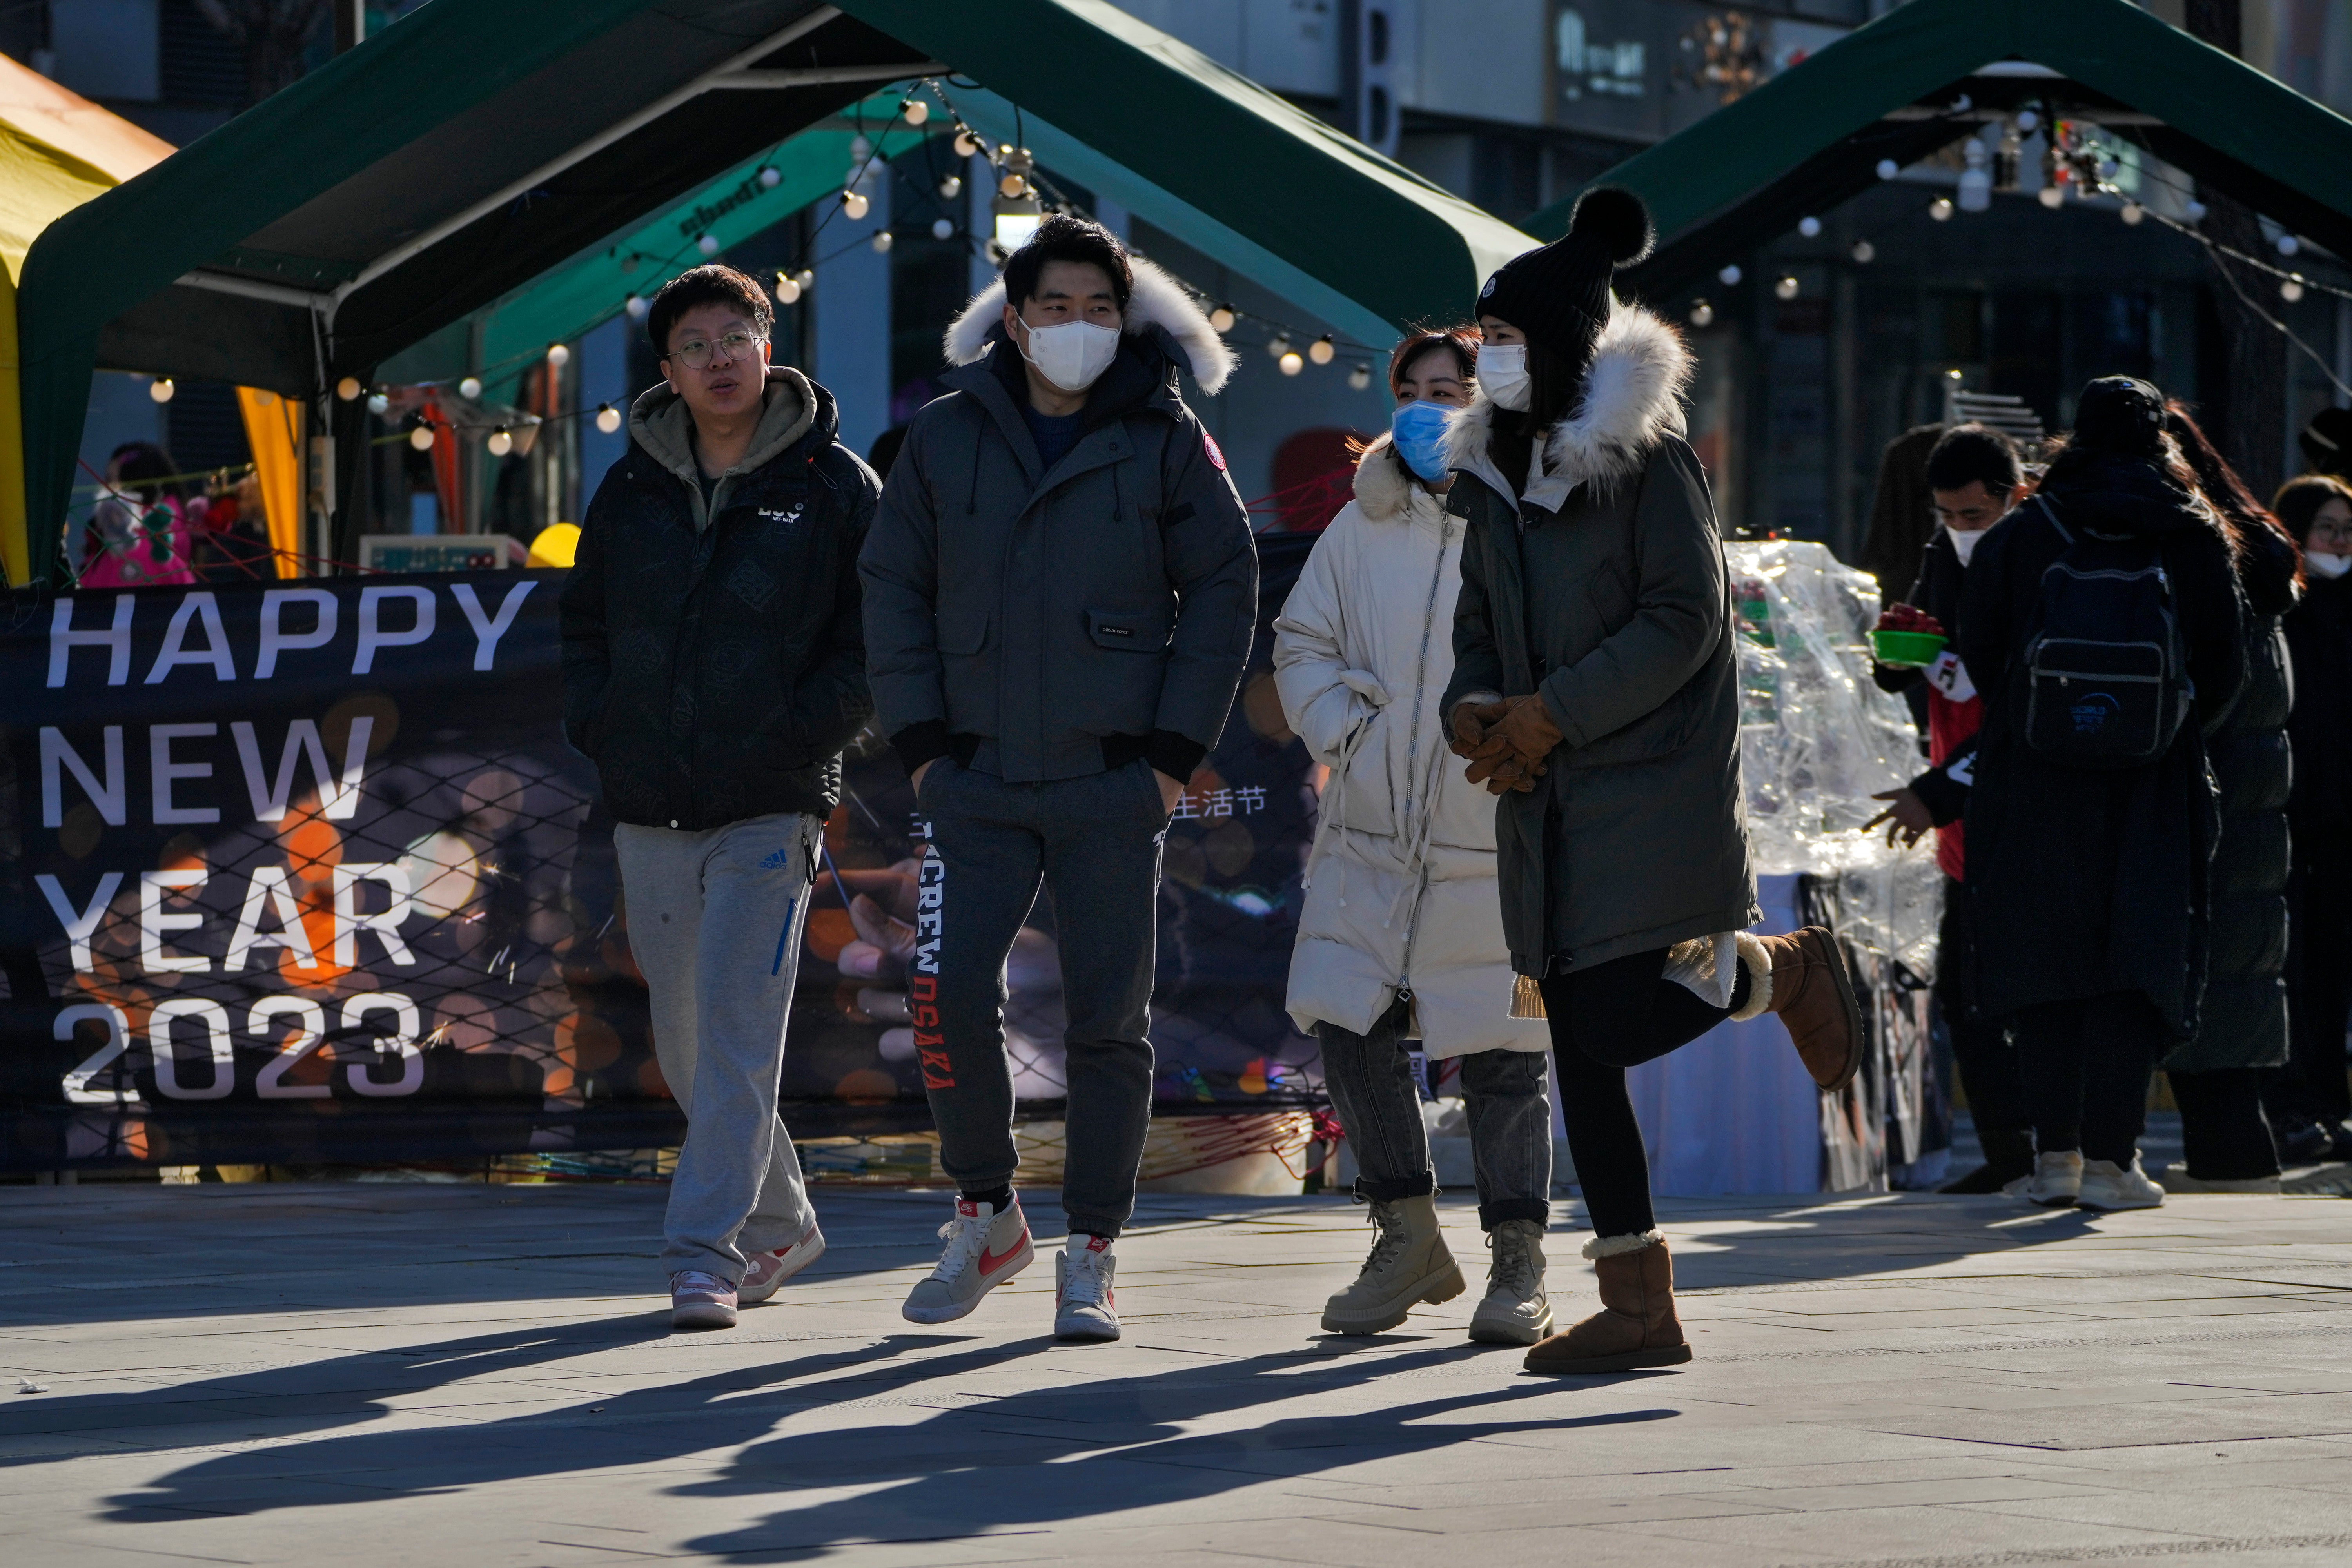 People wearing face masks walk through a bazaar outside a commercial office building in Beijing